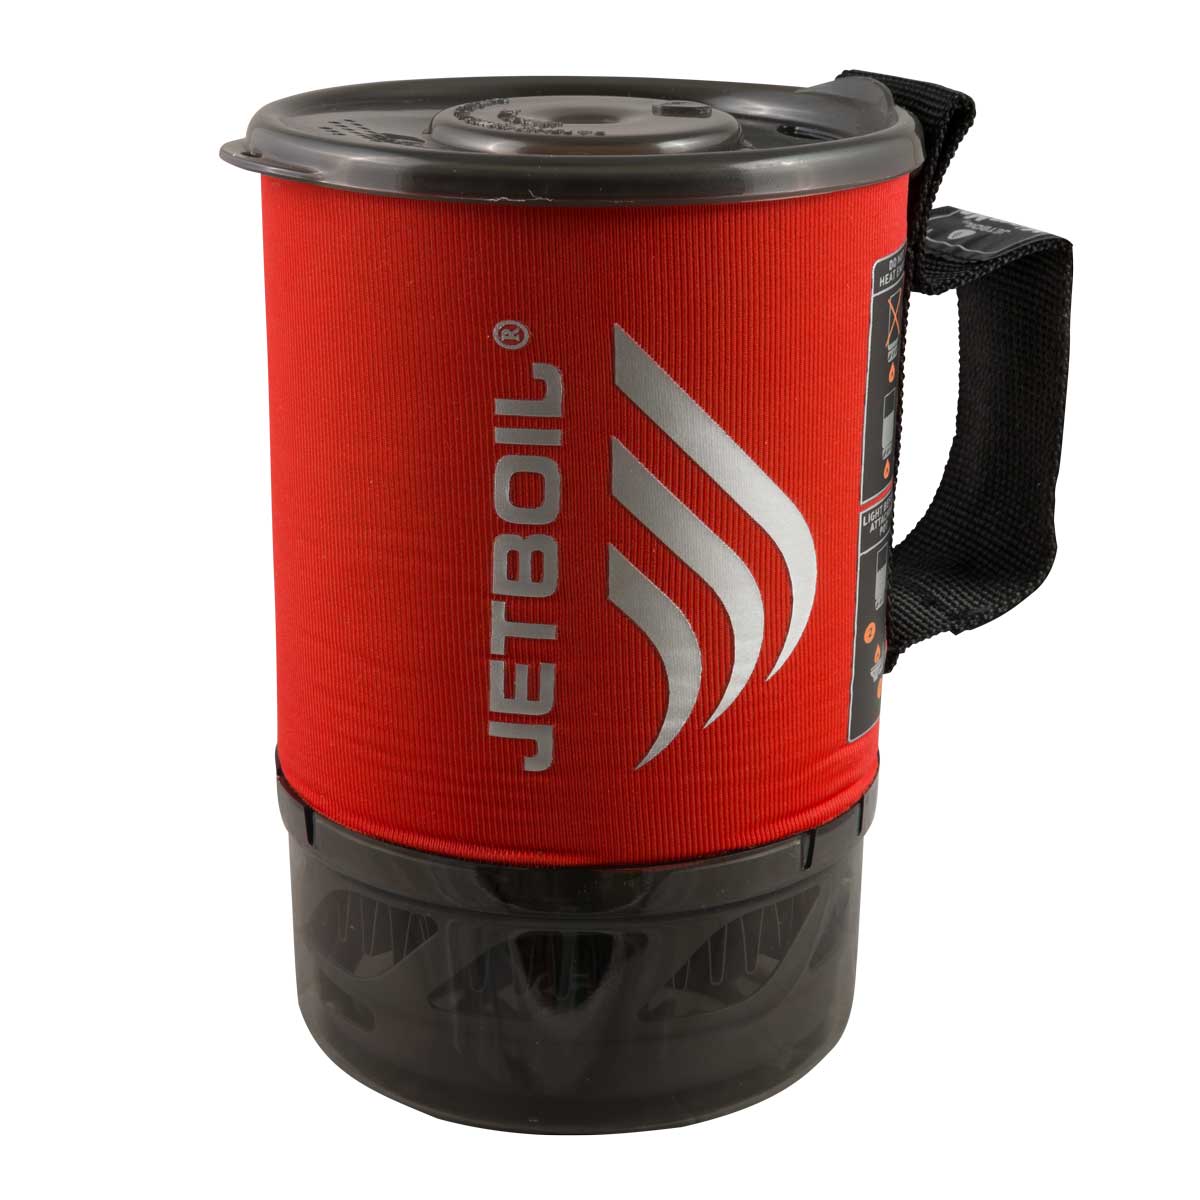 Jetboil MicroMo Cooking System - Gear For Adventure